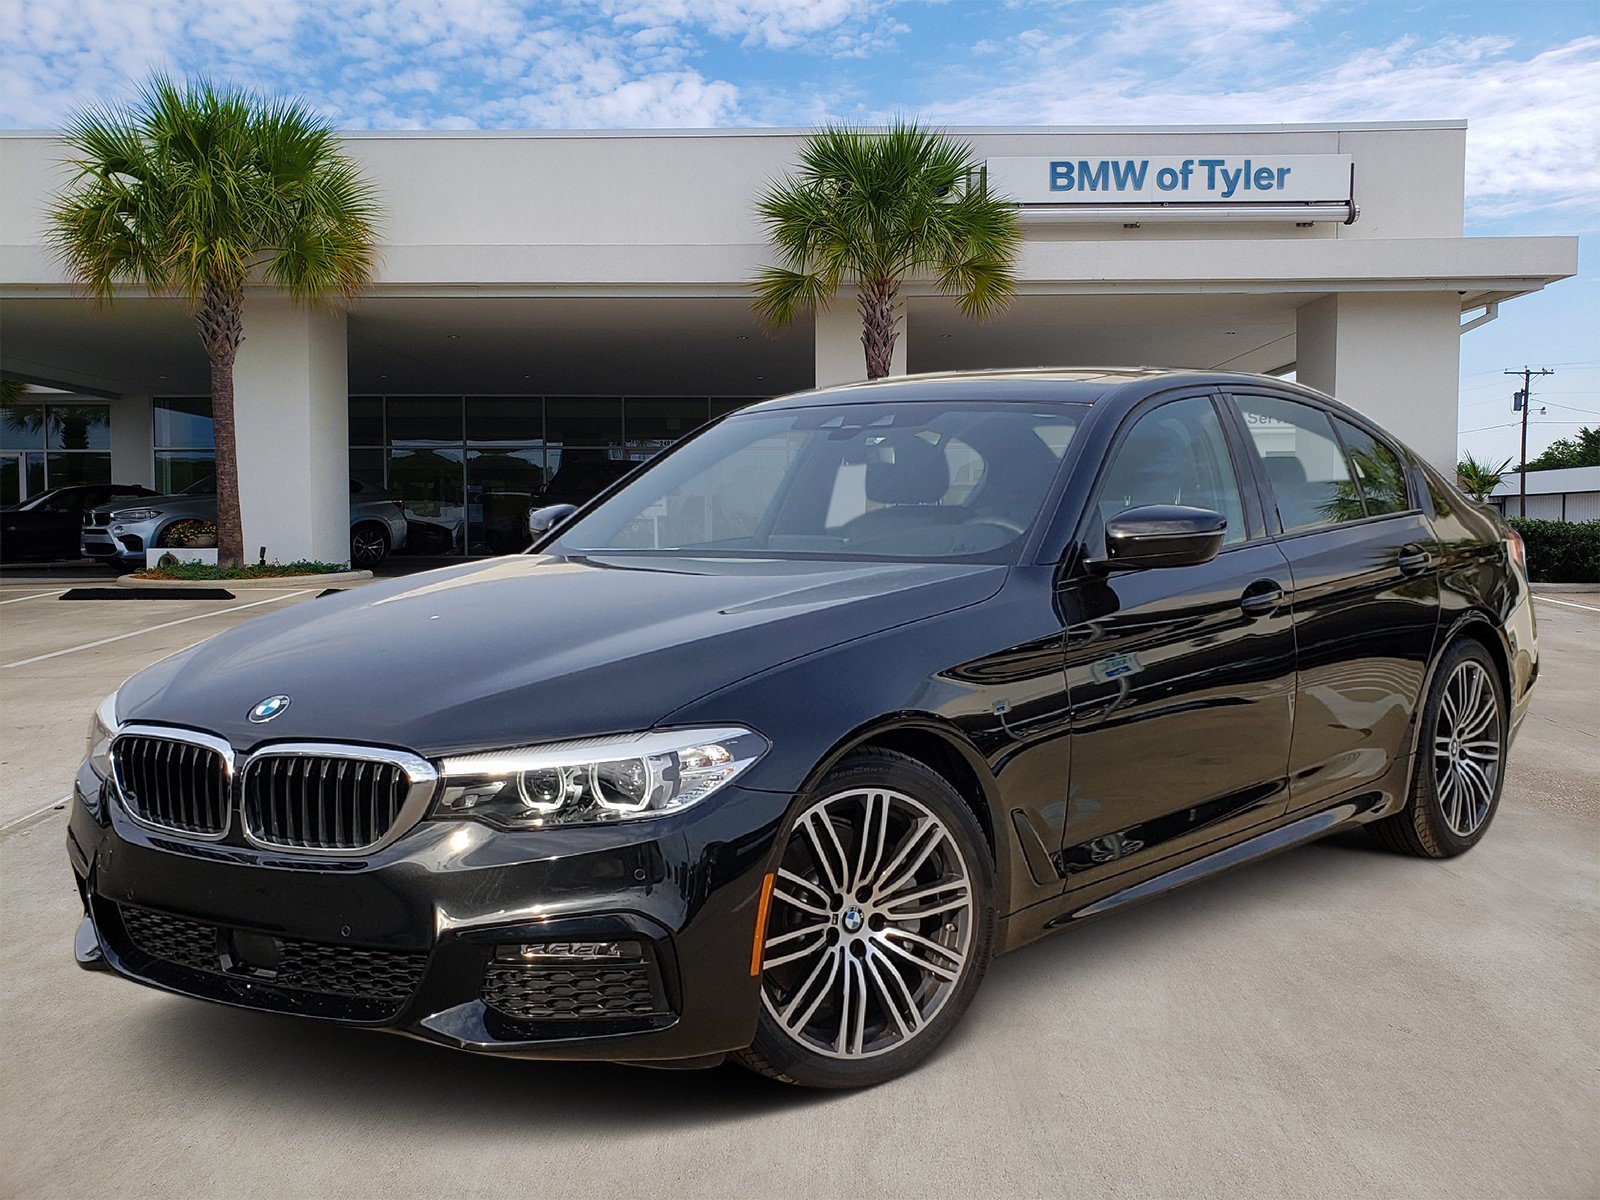 New 2019 BMW 5 Series 530i xDrive 4dr Car in Tyler #X911467 | BMW of Tyler